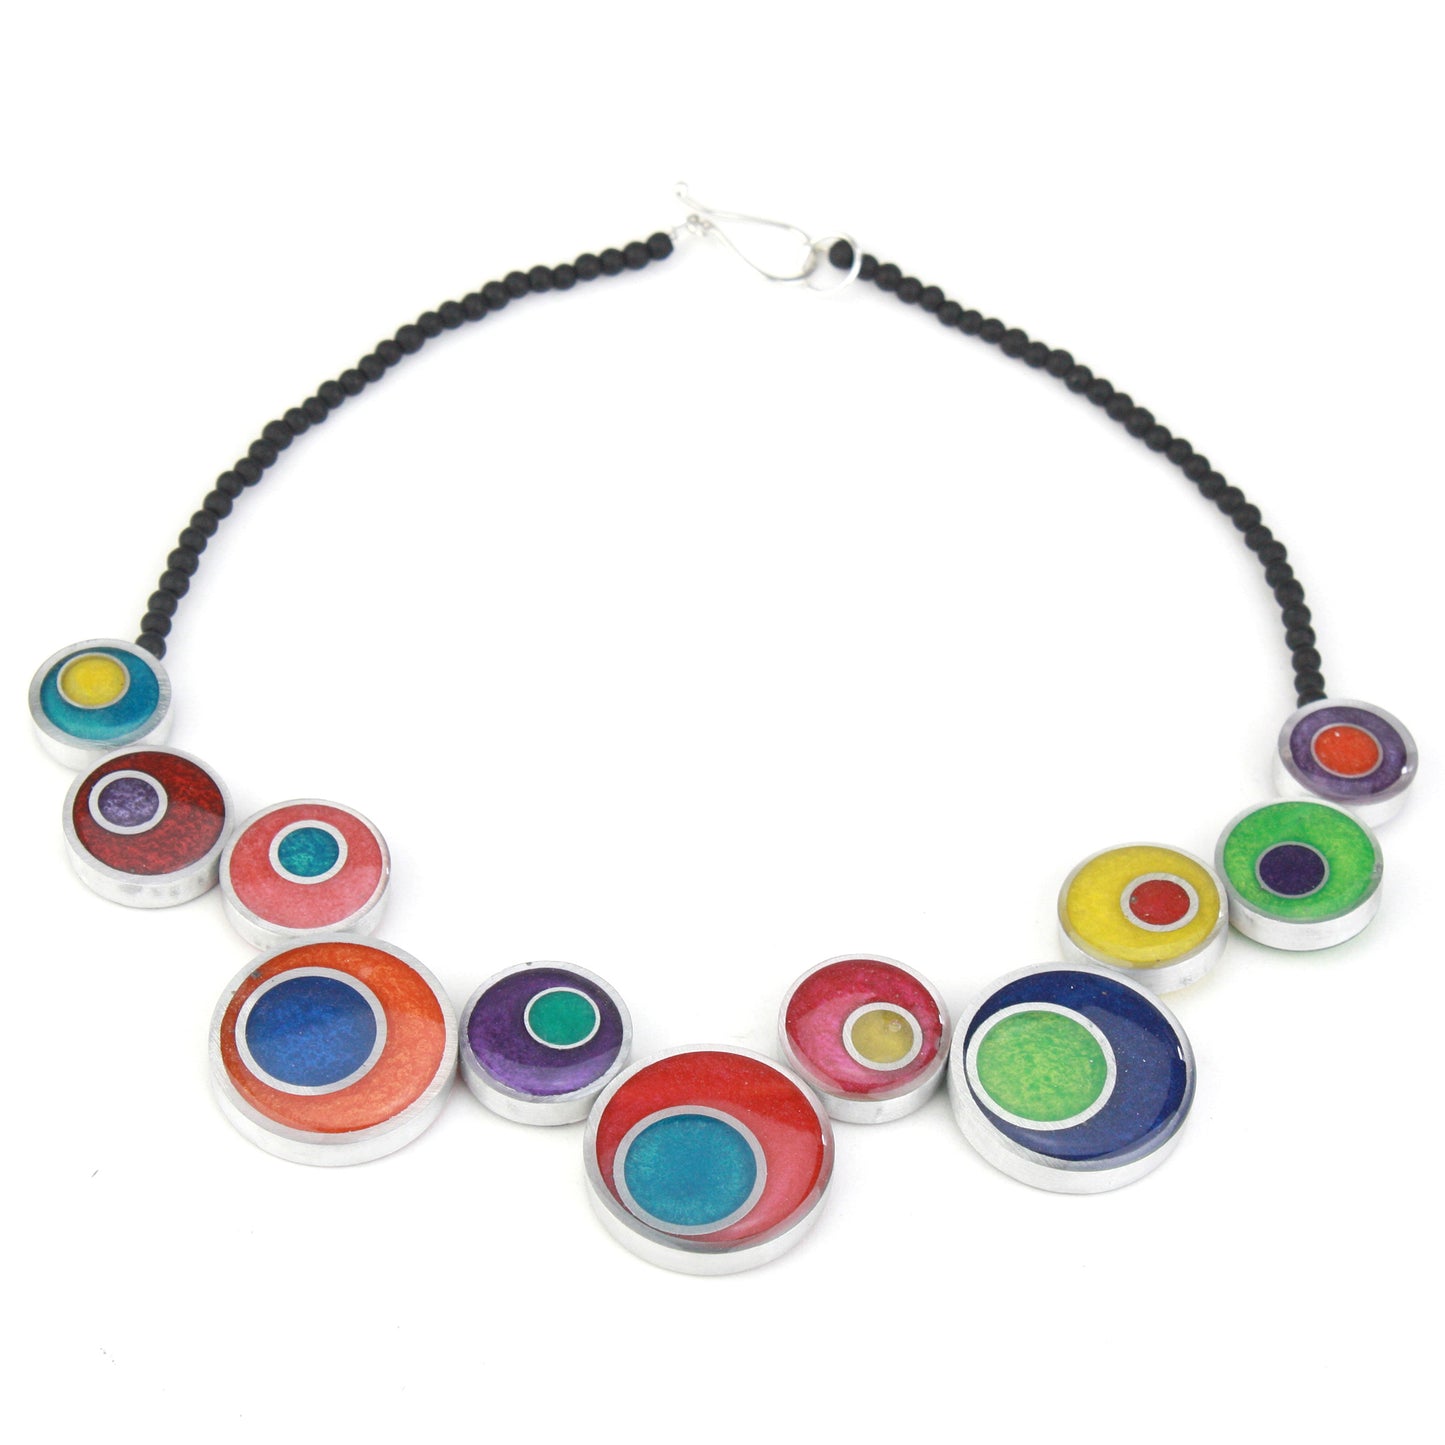 Resinique offset circle necklace - Multi colored